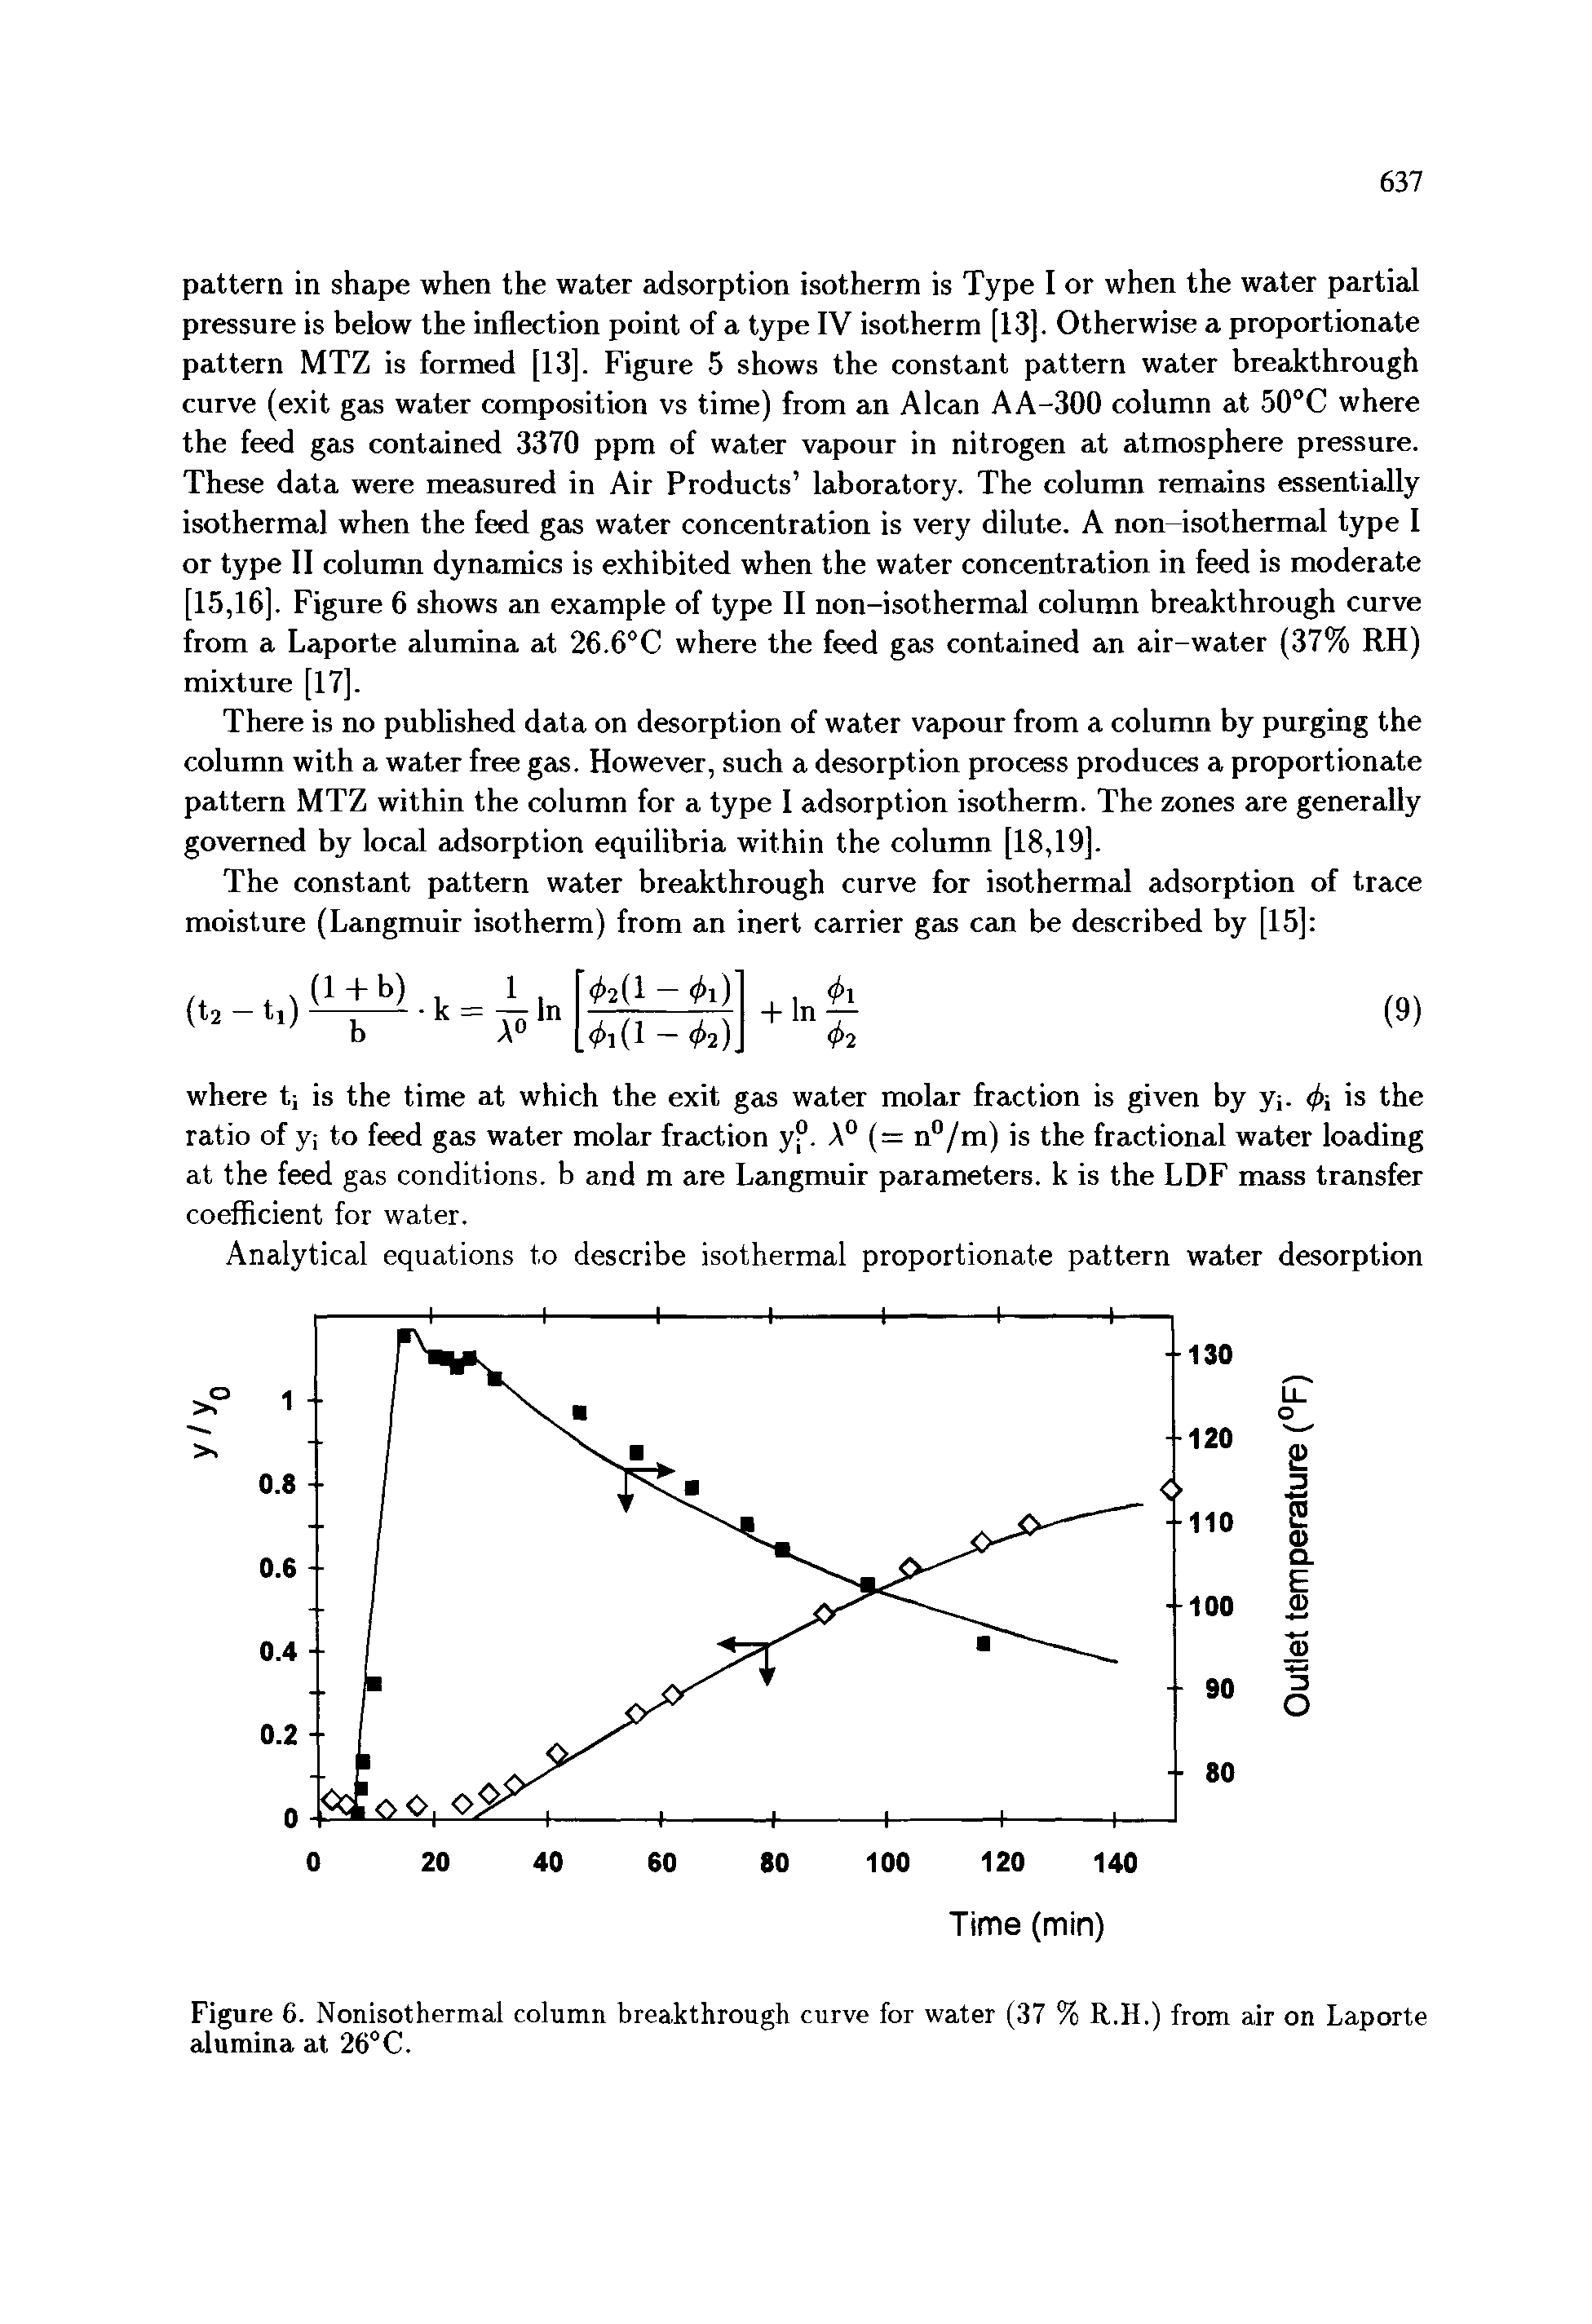 Figure 6. Nonisothermal column breakthrough curve for water (37 % R.H.) from air on Laporte alumina at 26° C.